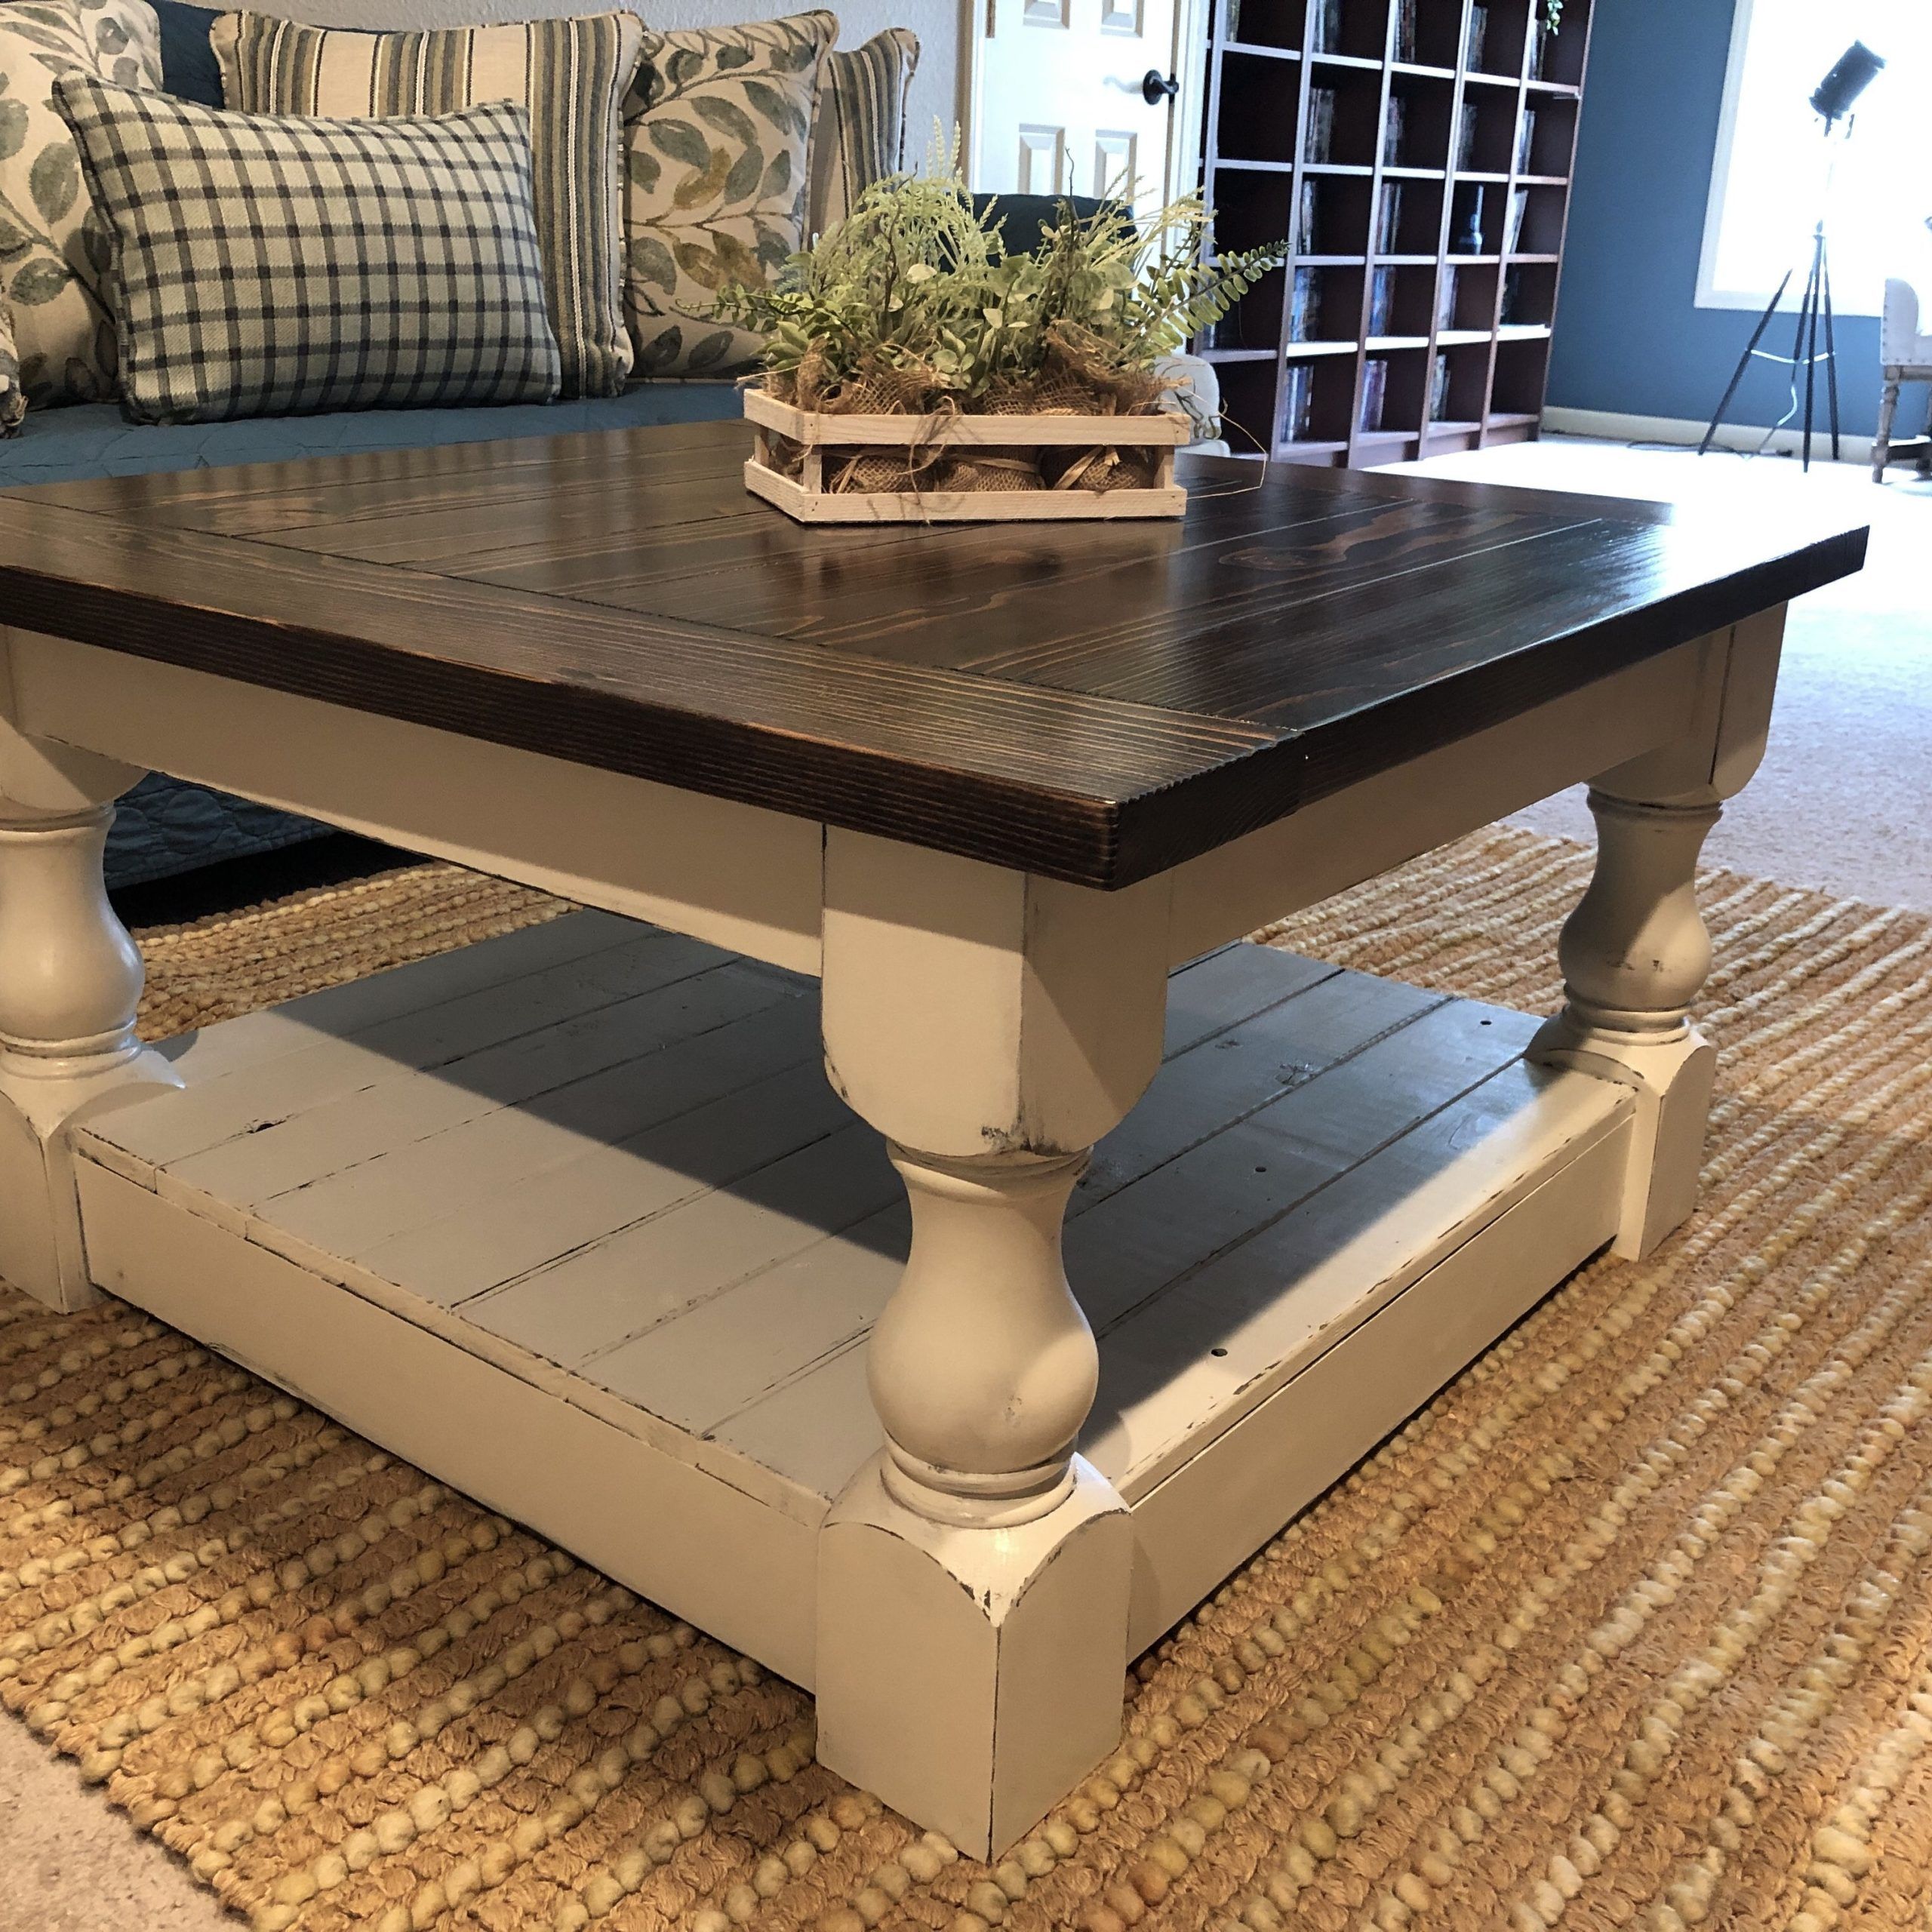 A Perfect Addition To Your Home: The Farmhouse Rustic Coffee Table Regarding Living Room Farmhouse Coffee Tables (View 9 of 15)